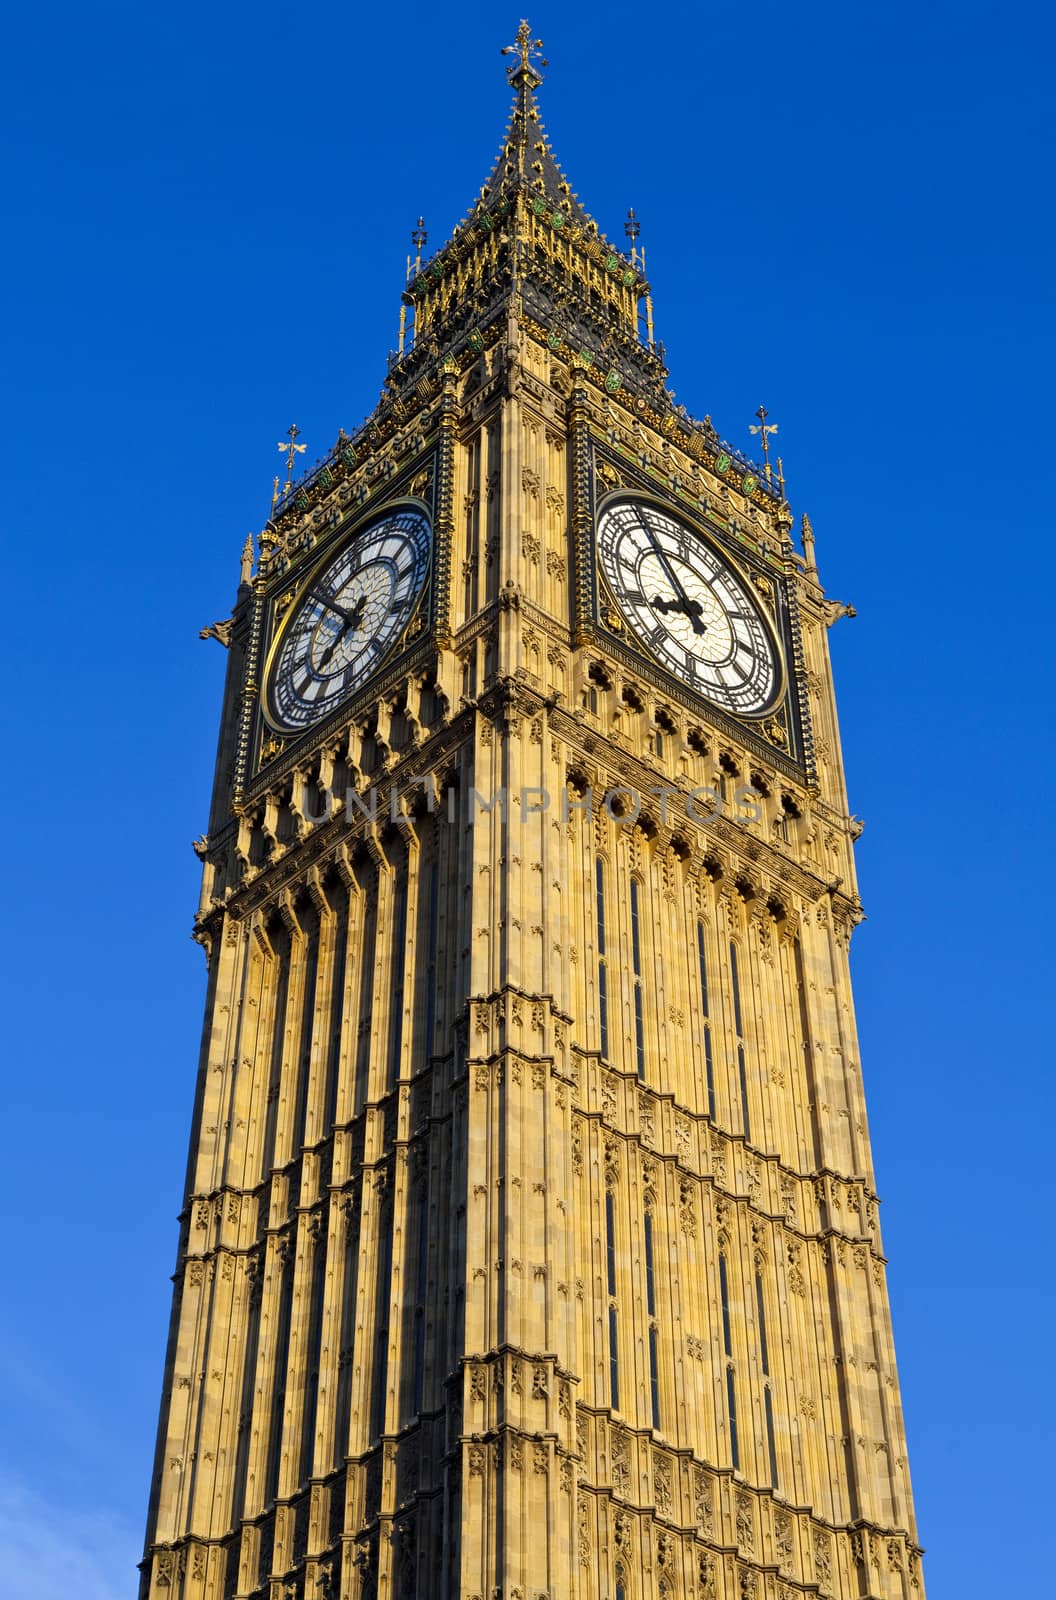 The magnificent Big Ben in London.